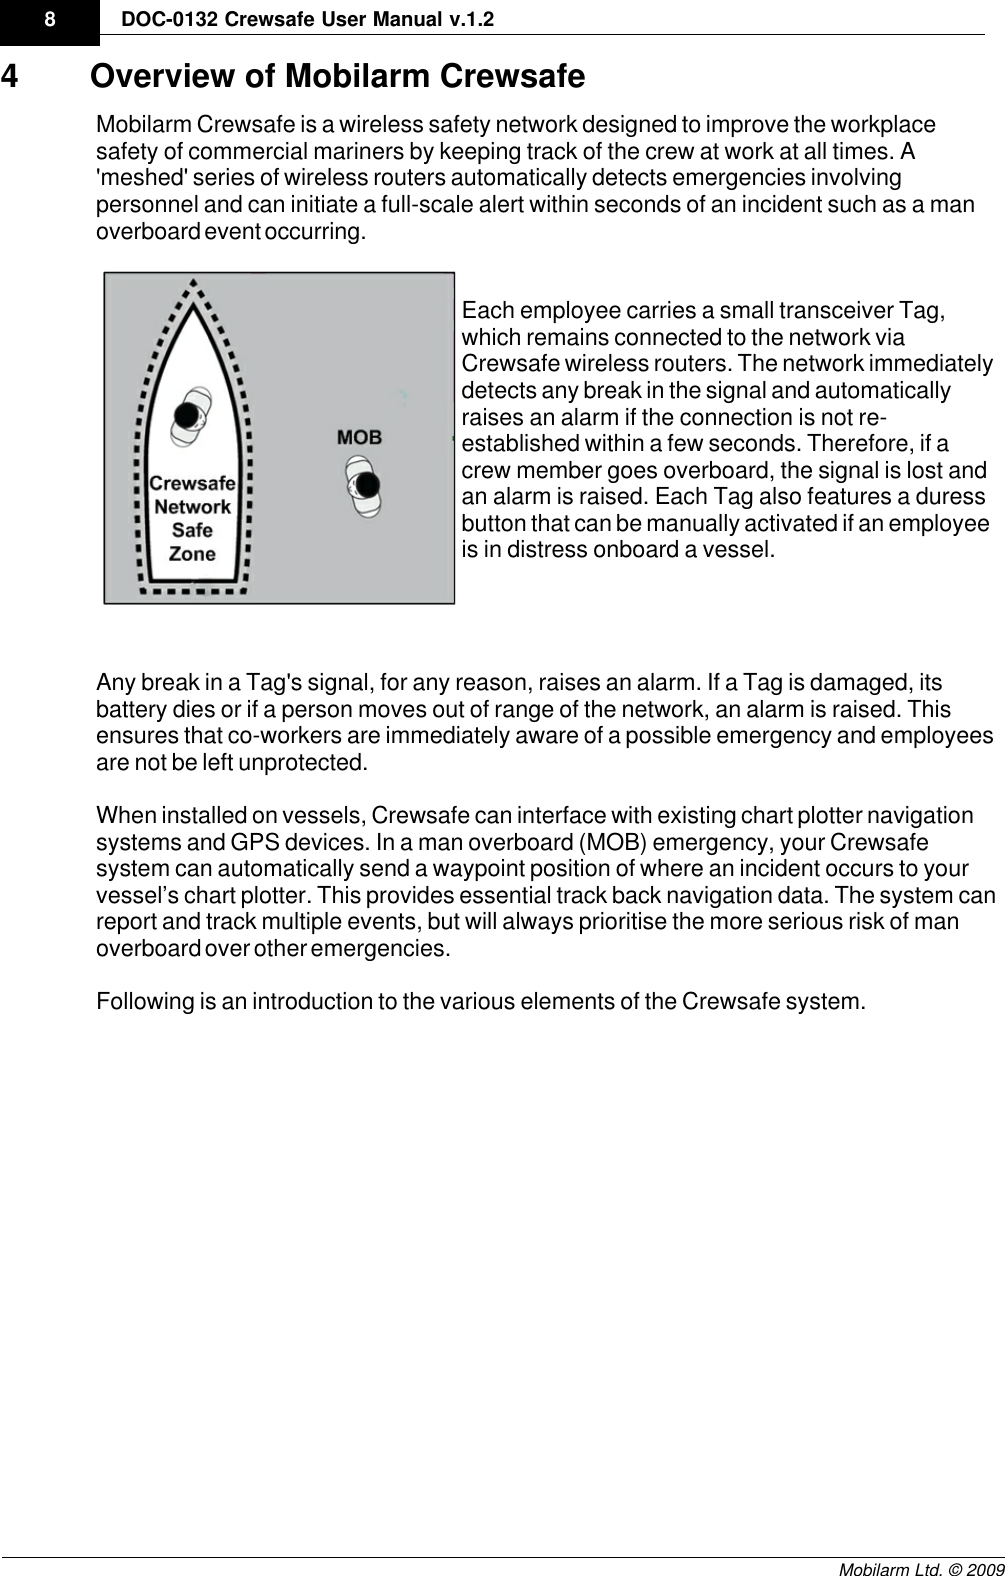 Draft8DOC-0132 Crewsafe User Manual v.1.2Mobilarm Ltd. © 20094 Overview of Mobilarm CrewsafeMobilarm Crewsafe is a wireless safety network designed to improve the workplacesafety of commercial mariners by keeping track of the crew at work at all times. A&apos;meshed&apos; series of wireless routers automatically detects emergencies involvingpersonnel and can initiate a full-scale alert within seconds of an incident such as a manoverboard event occurring.Each employee carries a small transceiver Tag,which remains connected to the network viaCrewsafe wireless routers. The network immediatelydetects any break in the signal and automaticallyraises an alarm if the connection is not re-established within a few seconds. Therefore, if acrew member goes overboard, the signal is lost andan alarm is raised. Each Tag also features a duressbutton that can be manually activated if an employeeis in distress onboard a vessel.Any break in a Tag&apos;s signal, for any reason, raises an alarm. If a Tag is damaged, itsbattery dies or if a person moves out of range of the network, an alarm is raised. Thisensures that co-workers are immediately aware of a possible emergency and employeesare not be left unprotected.  When installed on vessels, Crewsafe can interface with existing chart plotter navigationsystems and GPS devices. In a man overboard (MOB) emergency, your Crewsafesystem can automatically send a waypoint position of where an incident occurs to yourvessel’s chart plotter. This provides essential track back navigation data. The system canreport and track multiple events, but will always prioritise the more serious risk of manoverboard over other emergencies.Following is an introduction to the various elements of the Crewsafe system.